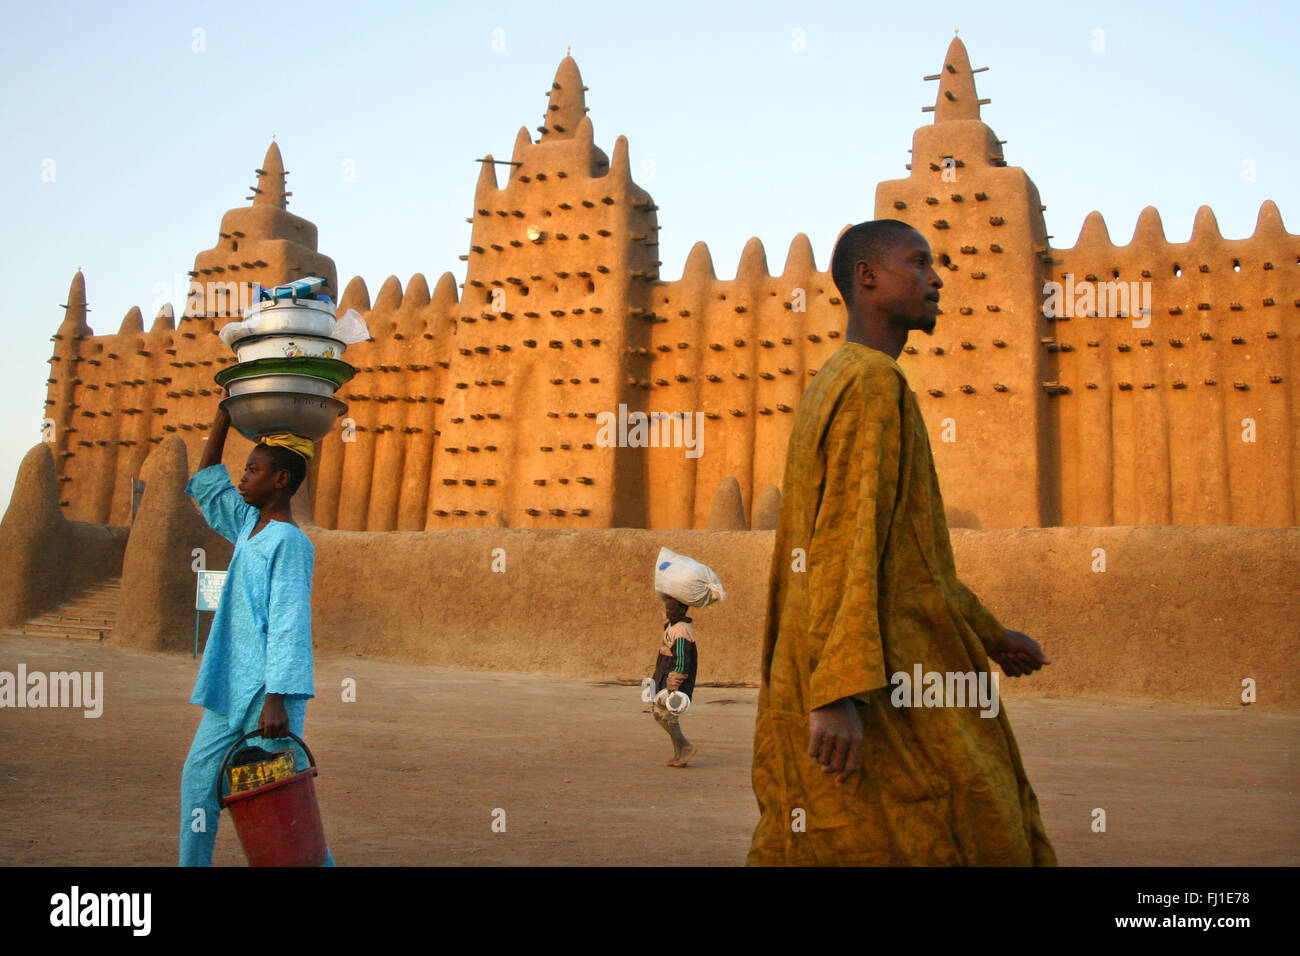 Stunning picture of amazing modsque of Djenné , Mali - typical Islamic monument in West Africa Stock Photo